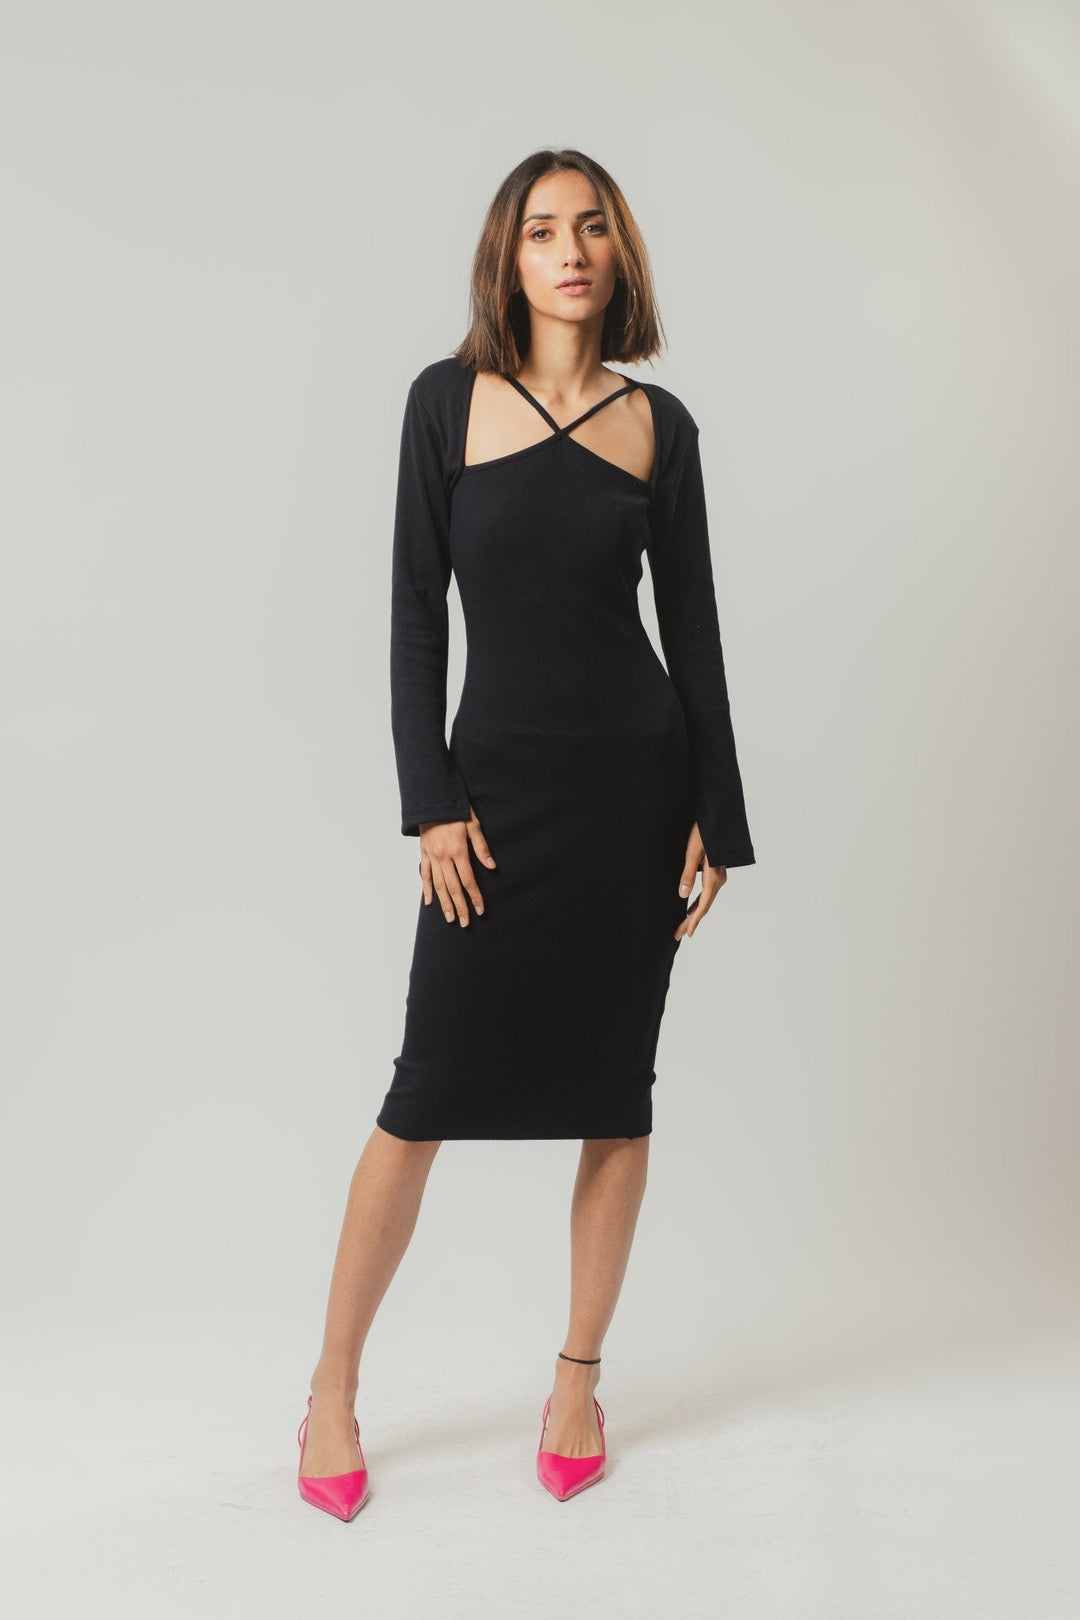 Midi party dress, fitted bodycon dress with a flared skirt